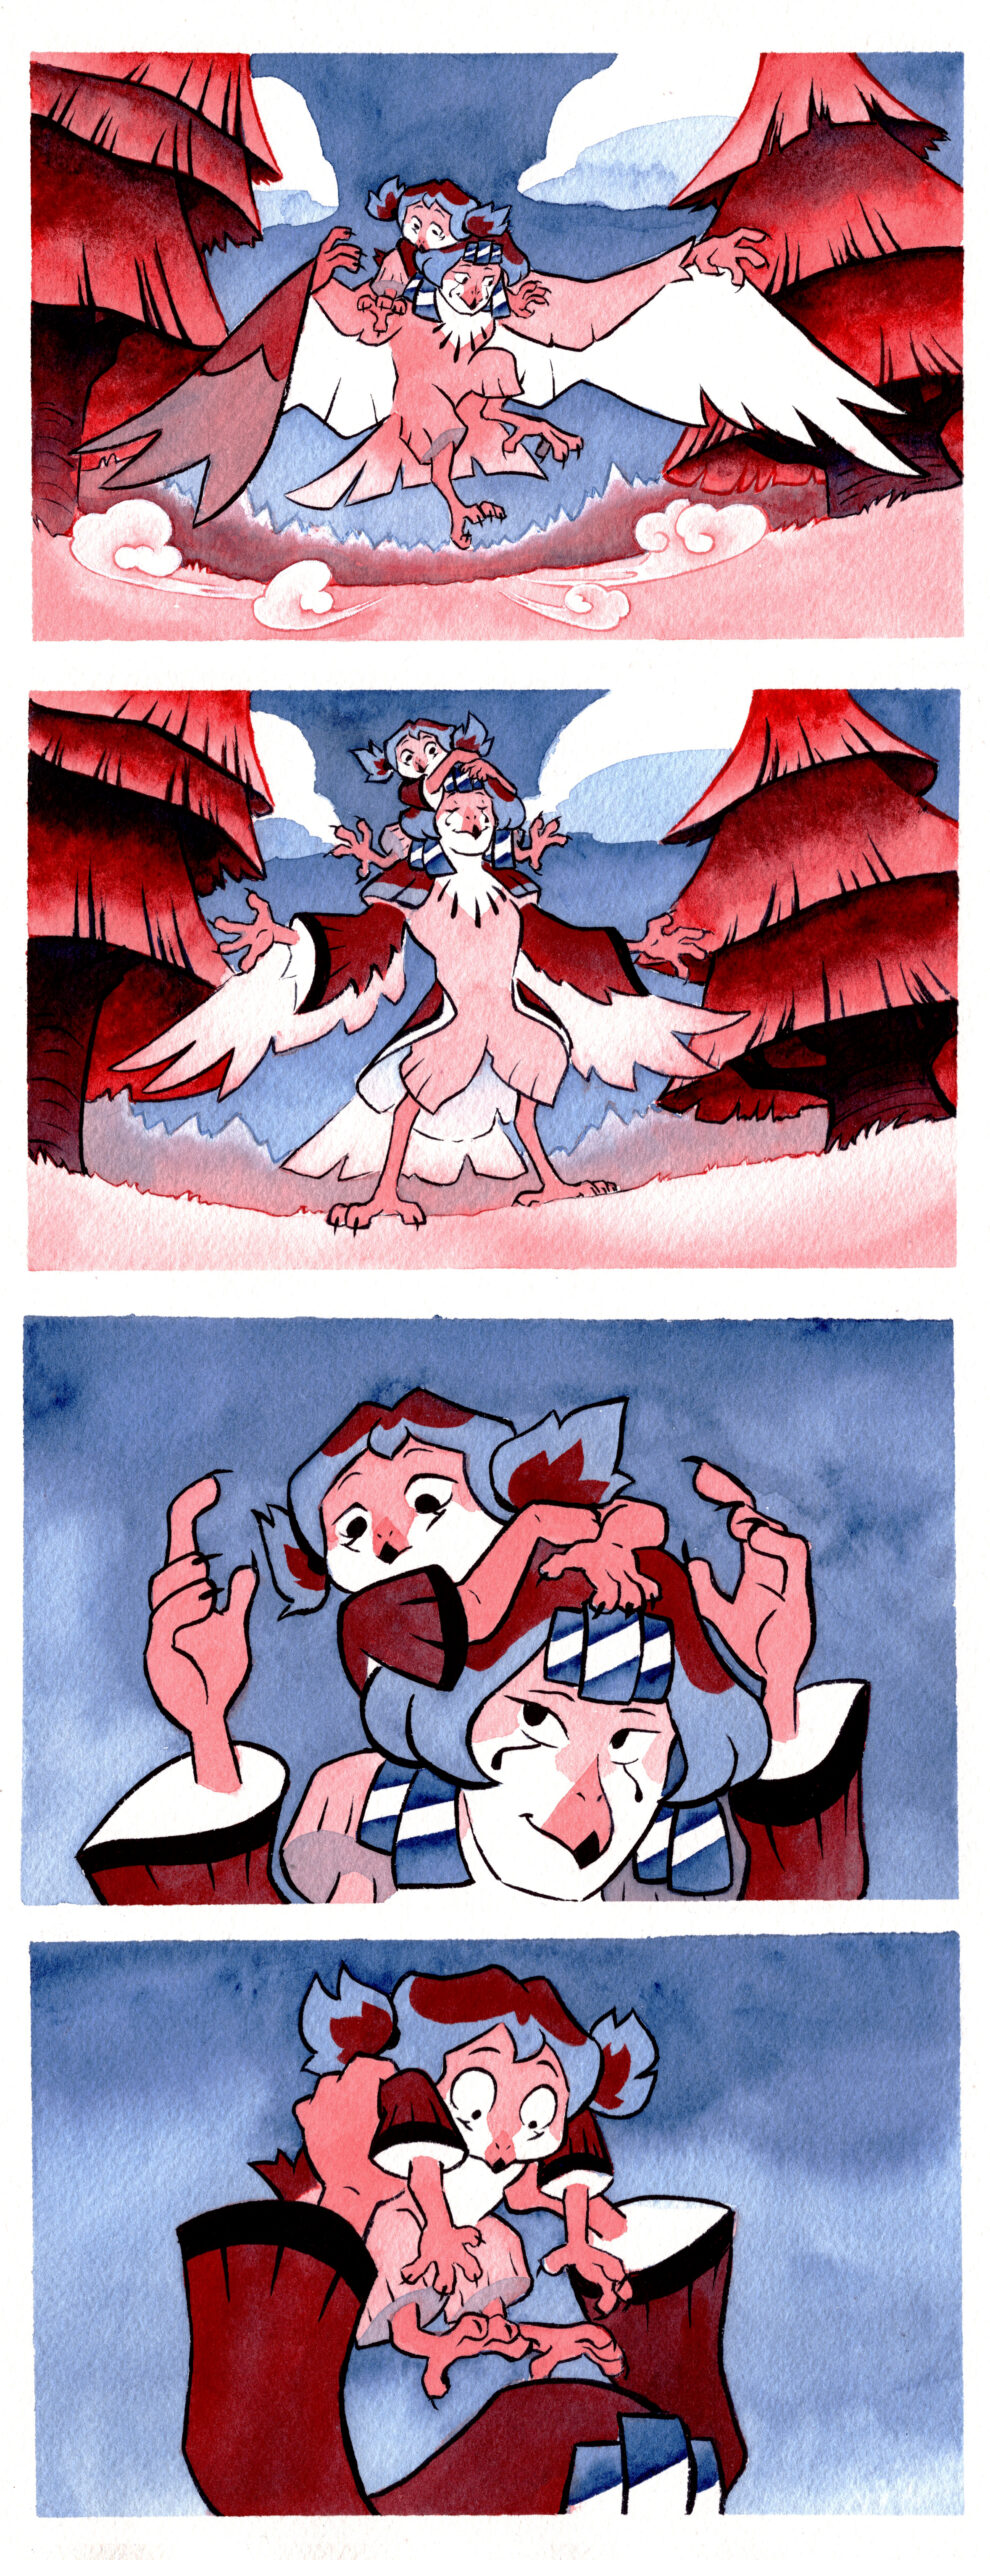 Panel 1: Aria lands on the ground surrounded by ruby red pine trees. Kia clings to her, still riding on her shoulders, and looks around at where they're landing. Panel 2: Now standing on the ground, Aria manipulates her giant flying wings and tail back into feathers that resemble sleeves, shoulder pads and the end of a tailcoat. Kia sits on her shoulders, looking at her. Panel 3: Close on Kia on Aria's shoulder as Aria looks at her and brings her clawed hands up to her. Panel 4: Aria gently picks Kia up, plucking her from sitting on Aria's shoulders. Kia's limbs dangle as she looks surprised.